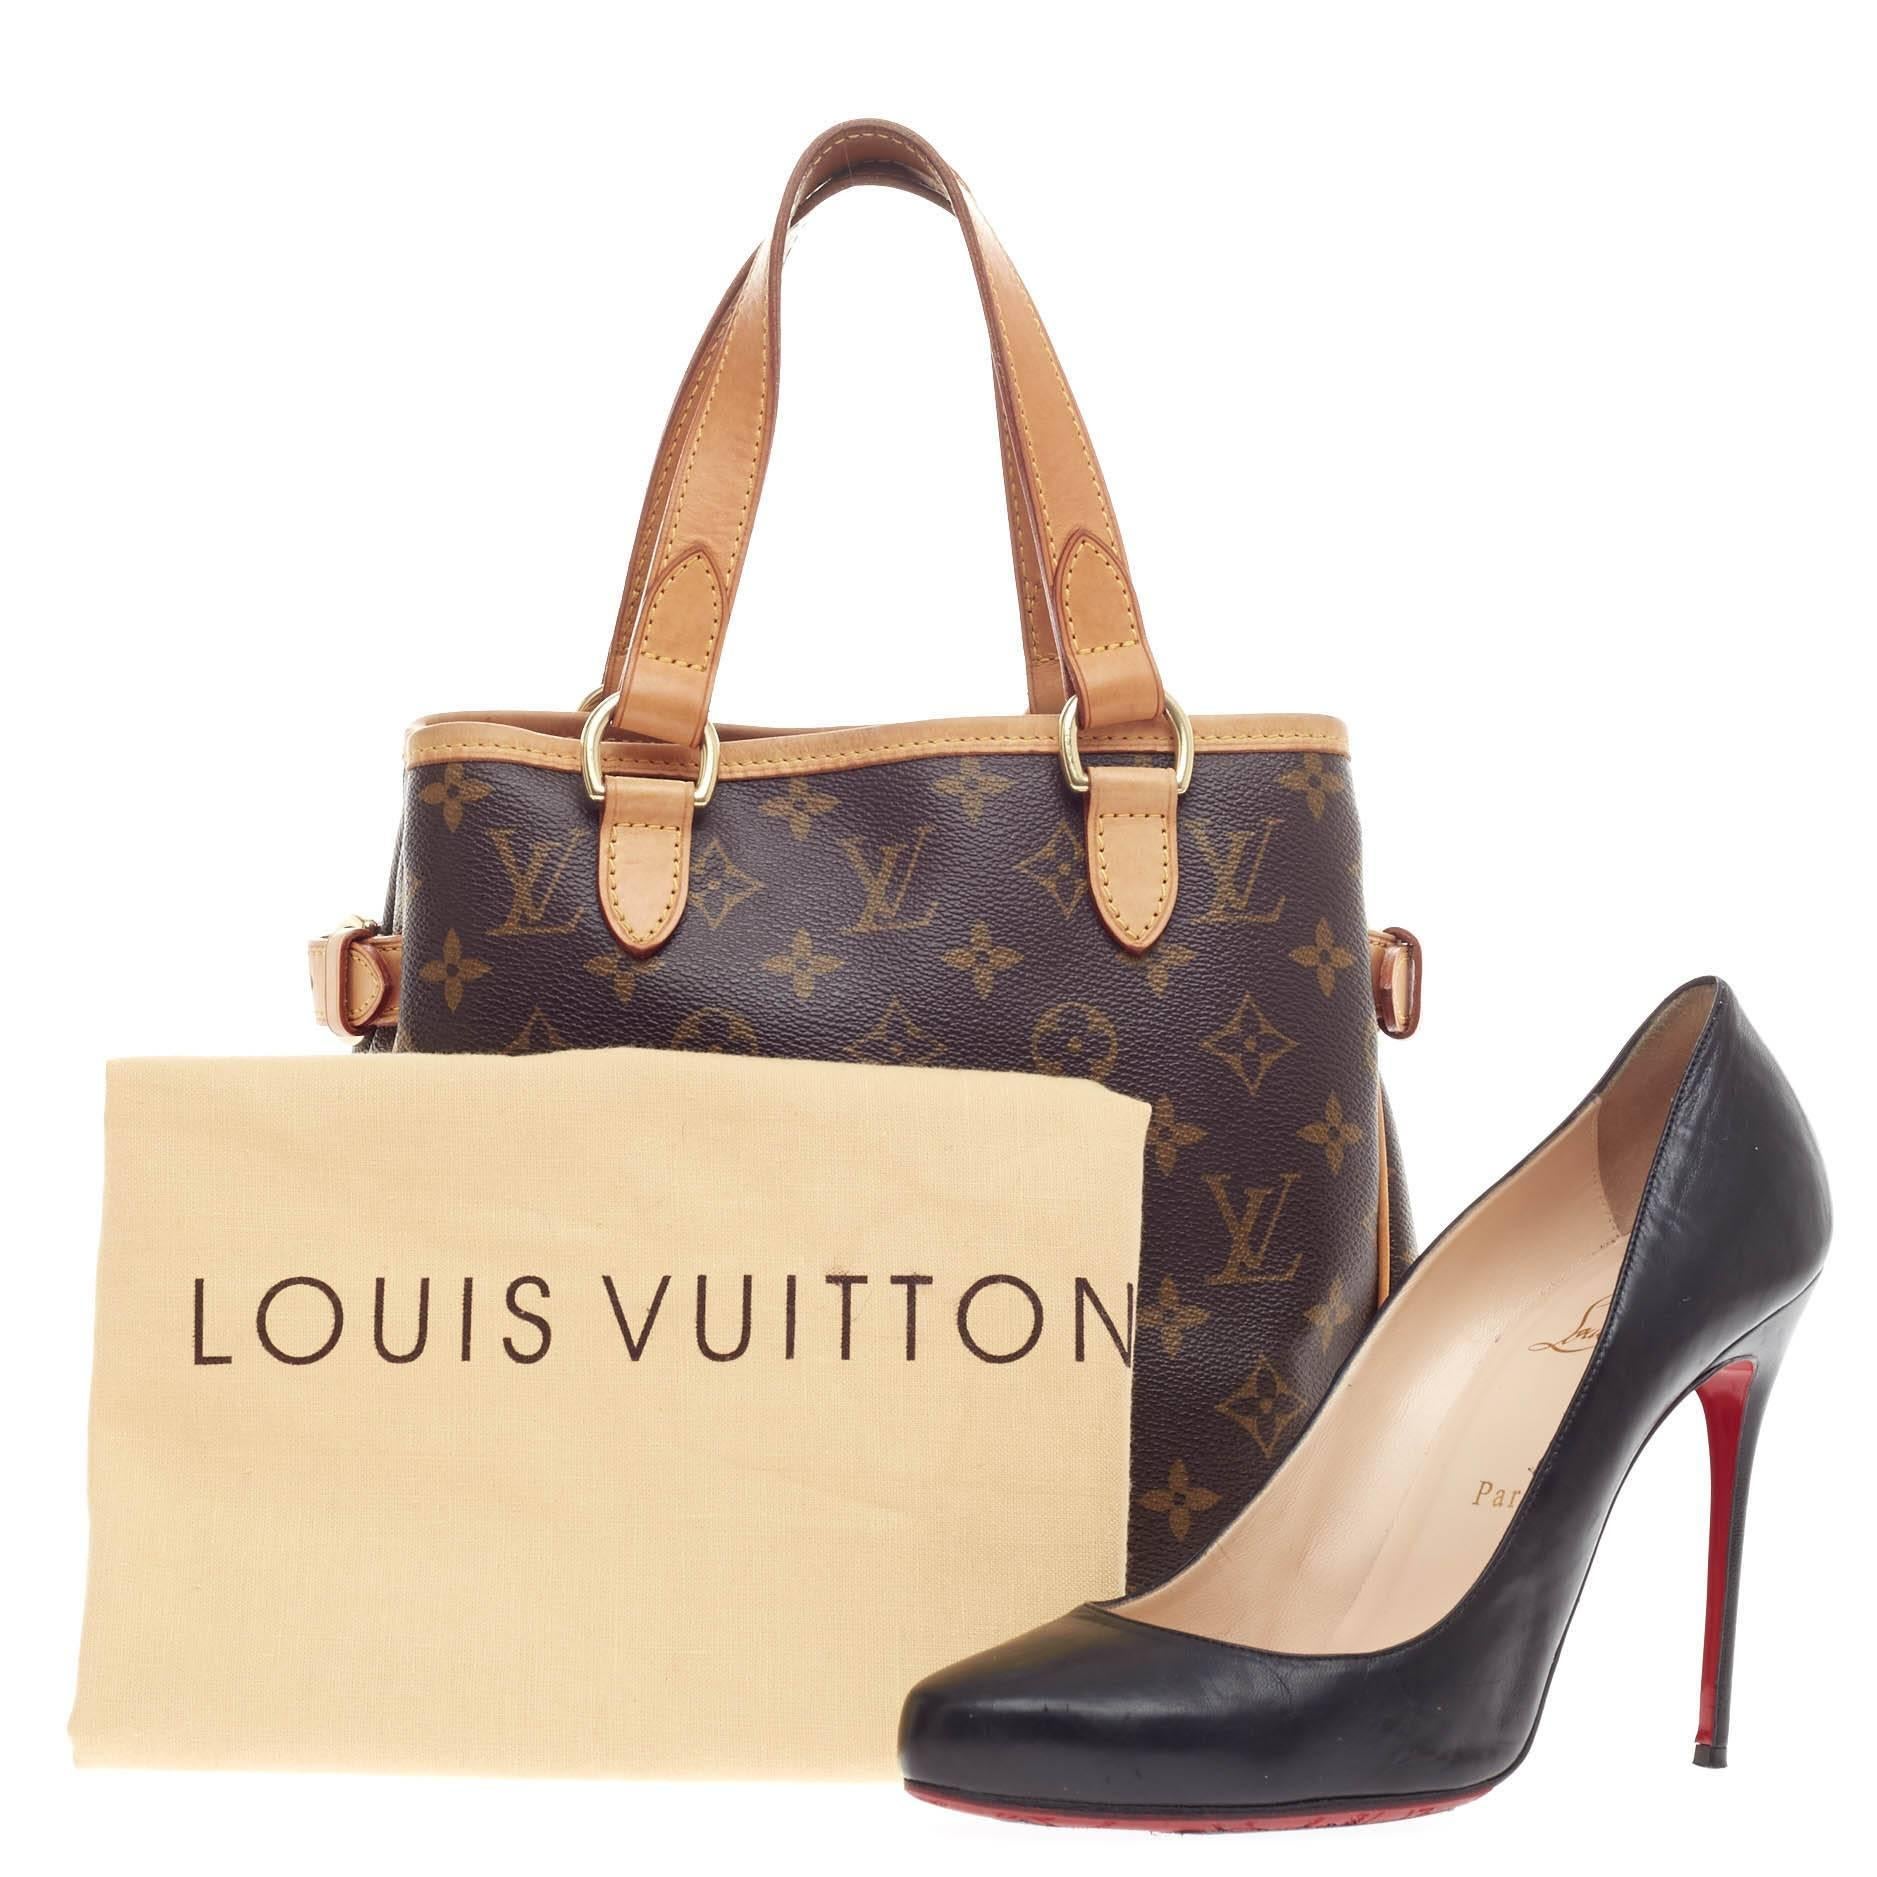 This authentic Louis Vuitton Batignolles Monogram Canvas is a chic and iconic accessory for any fashionista's wardrobe. Crafted from Louis Vuitton's signature monogram canvas print, this bag features cowhide leather trimming and handles, brass